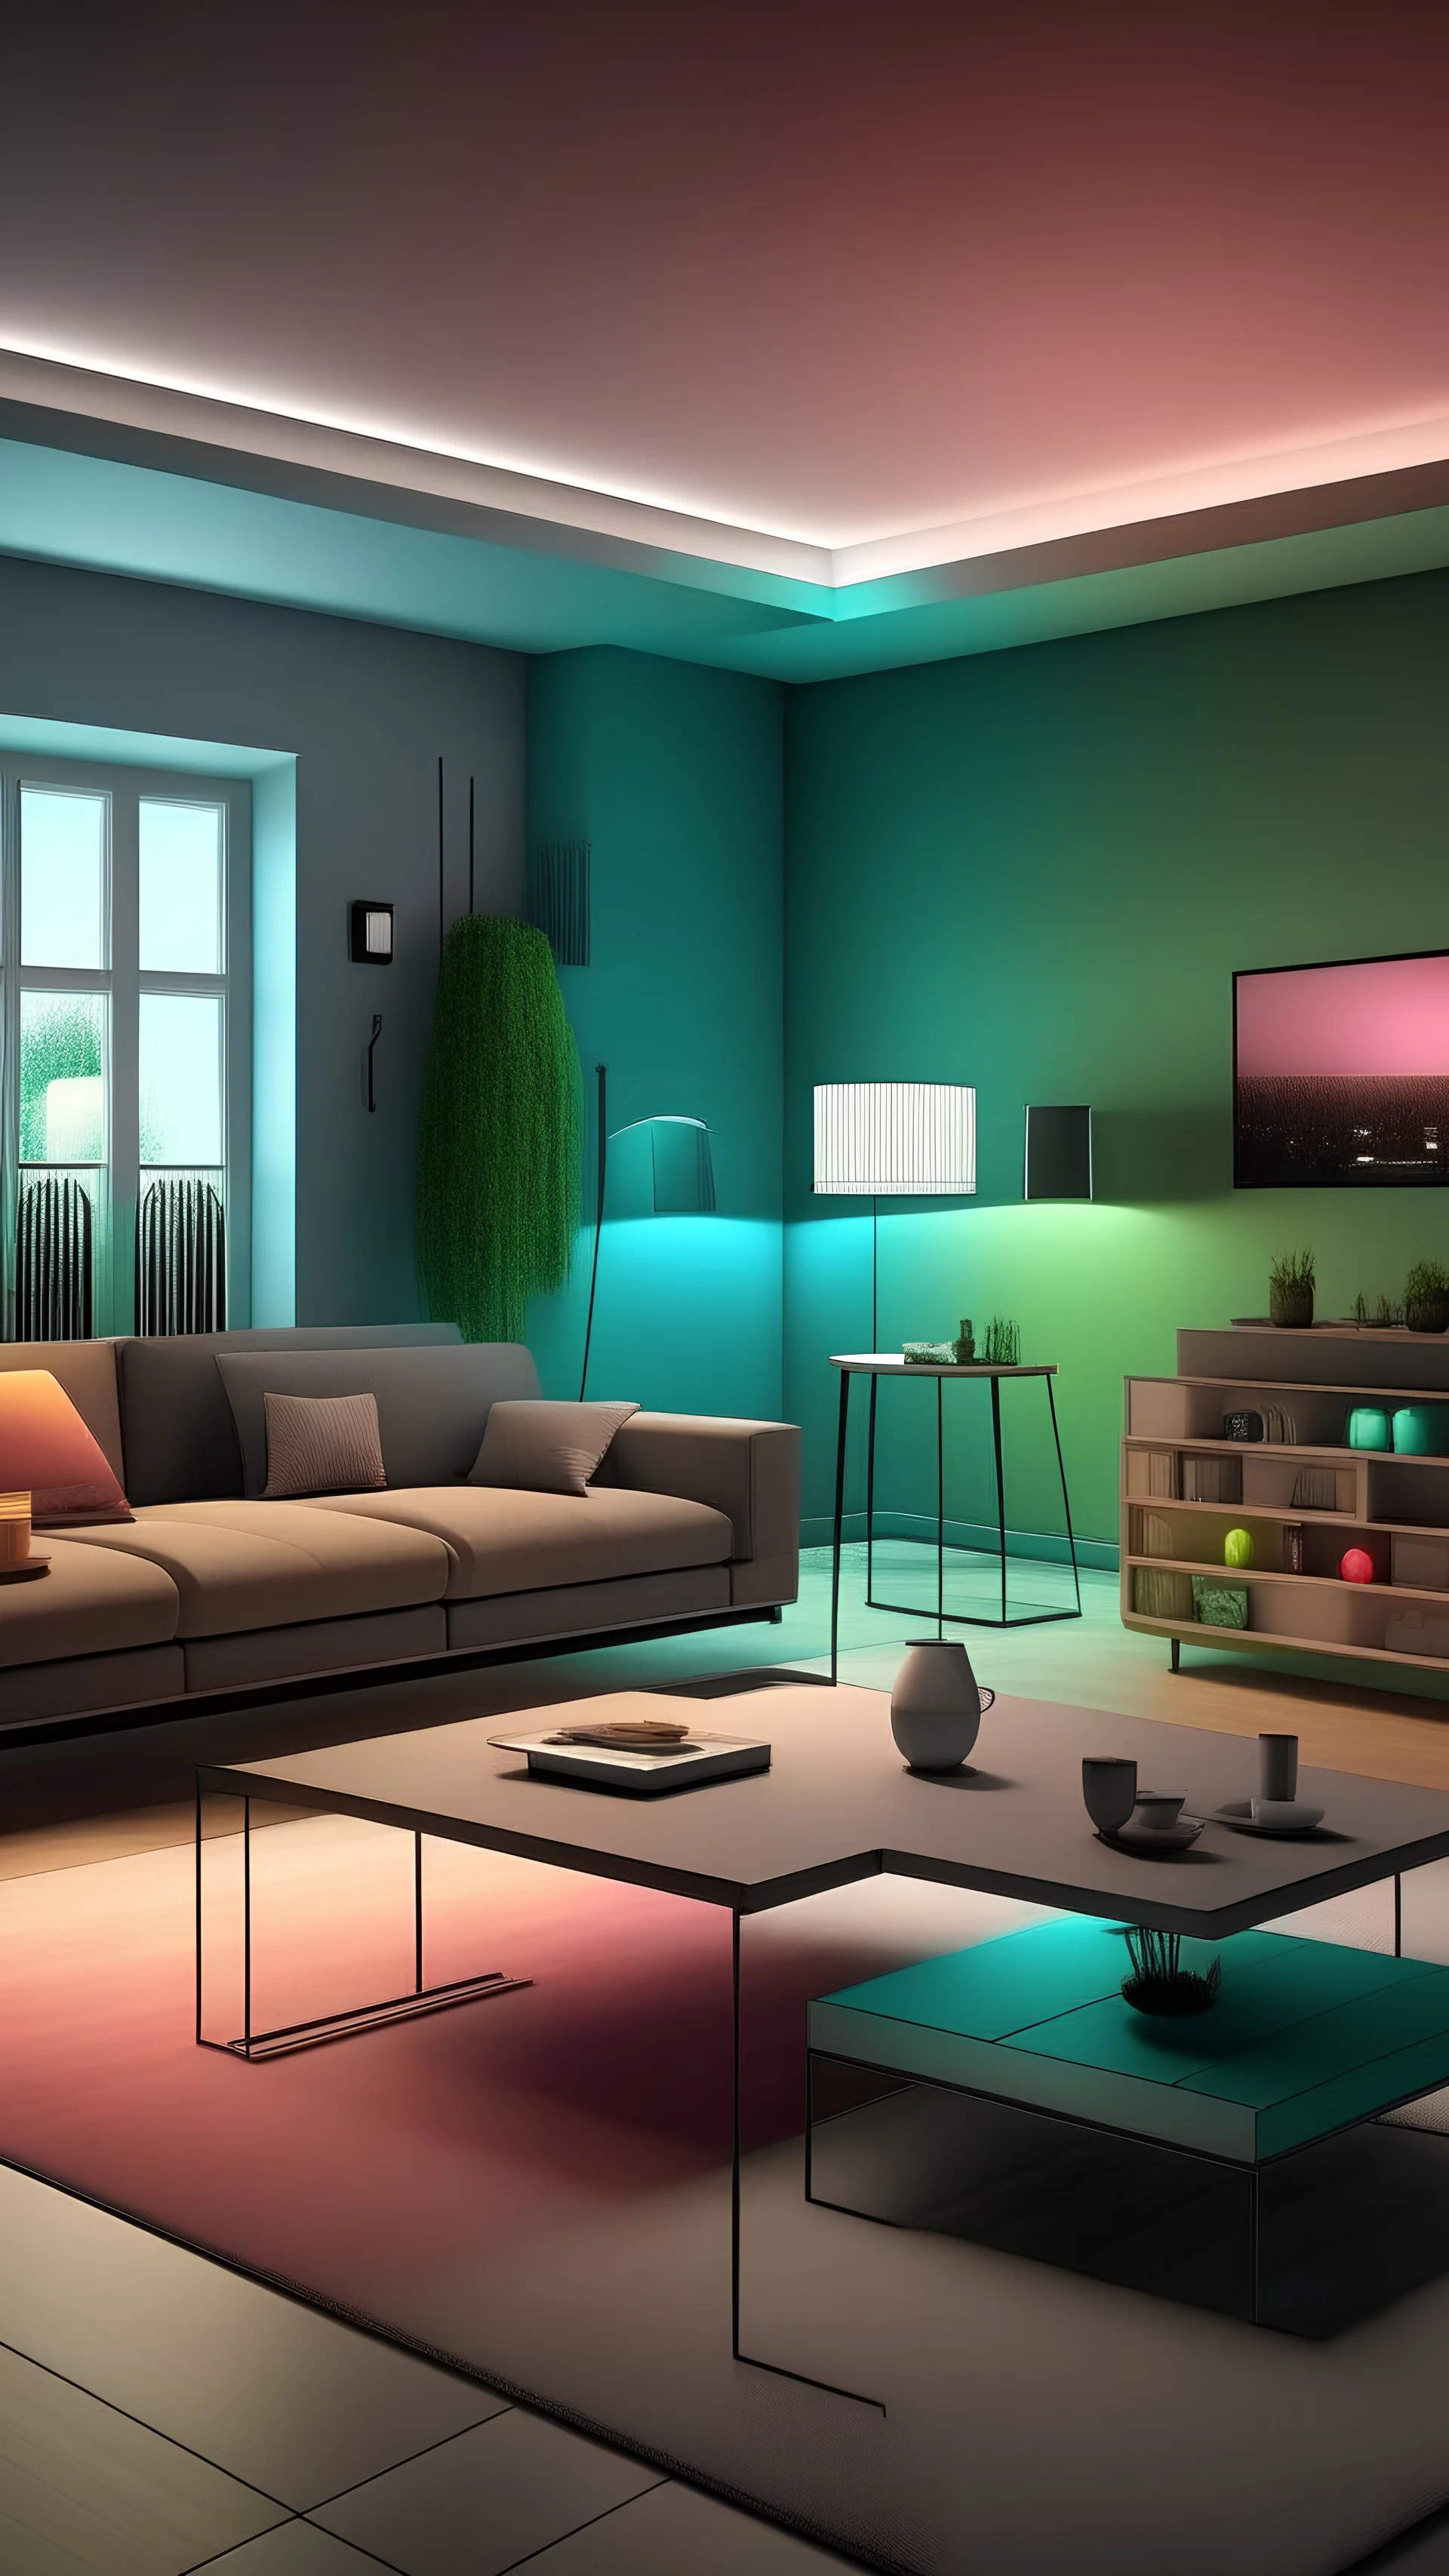 Generate an image depicting a modern living room where the lighting is controlled through a smartphone app, showcasing different lighting scenes and color options.